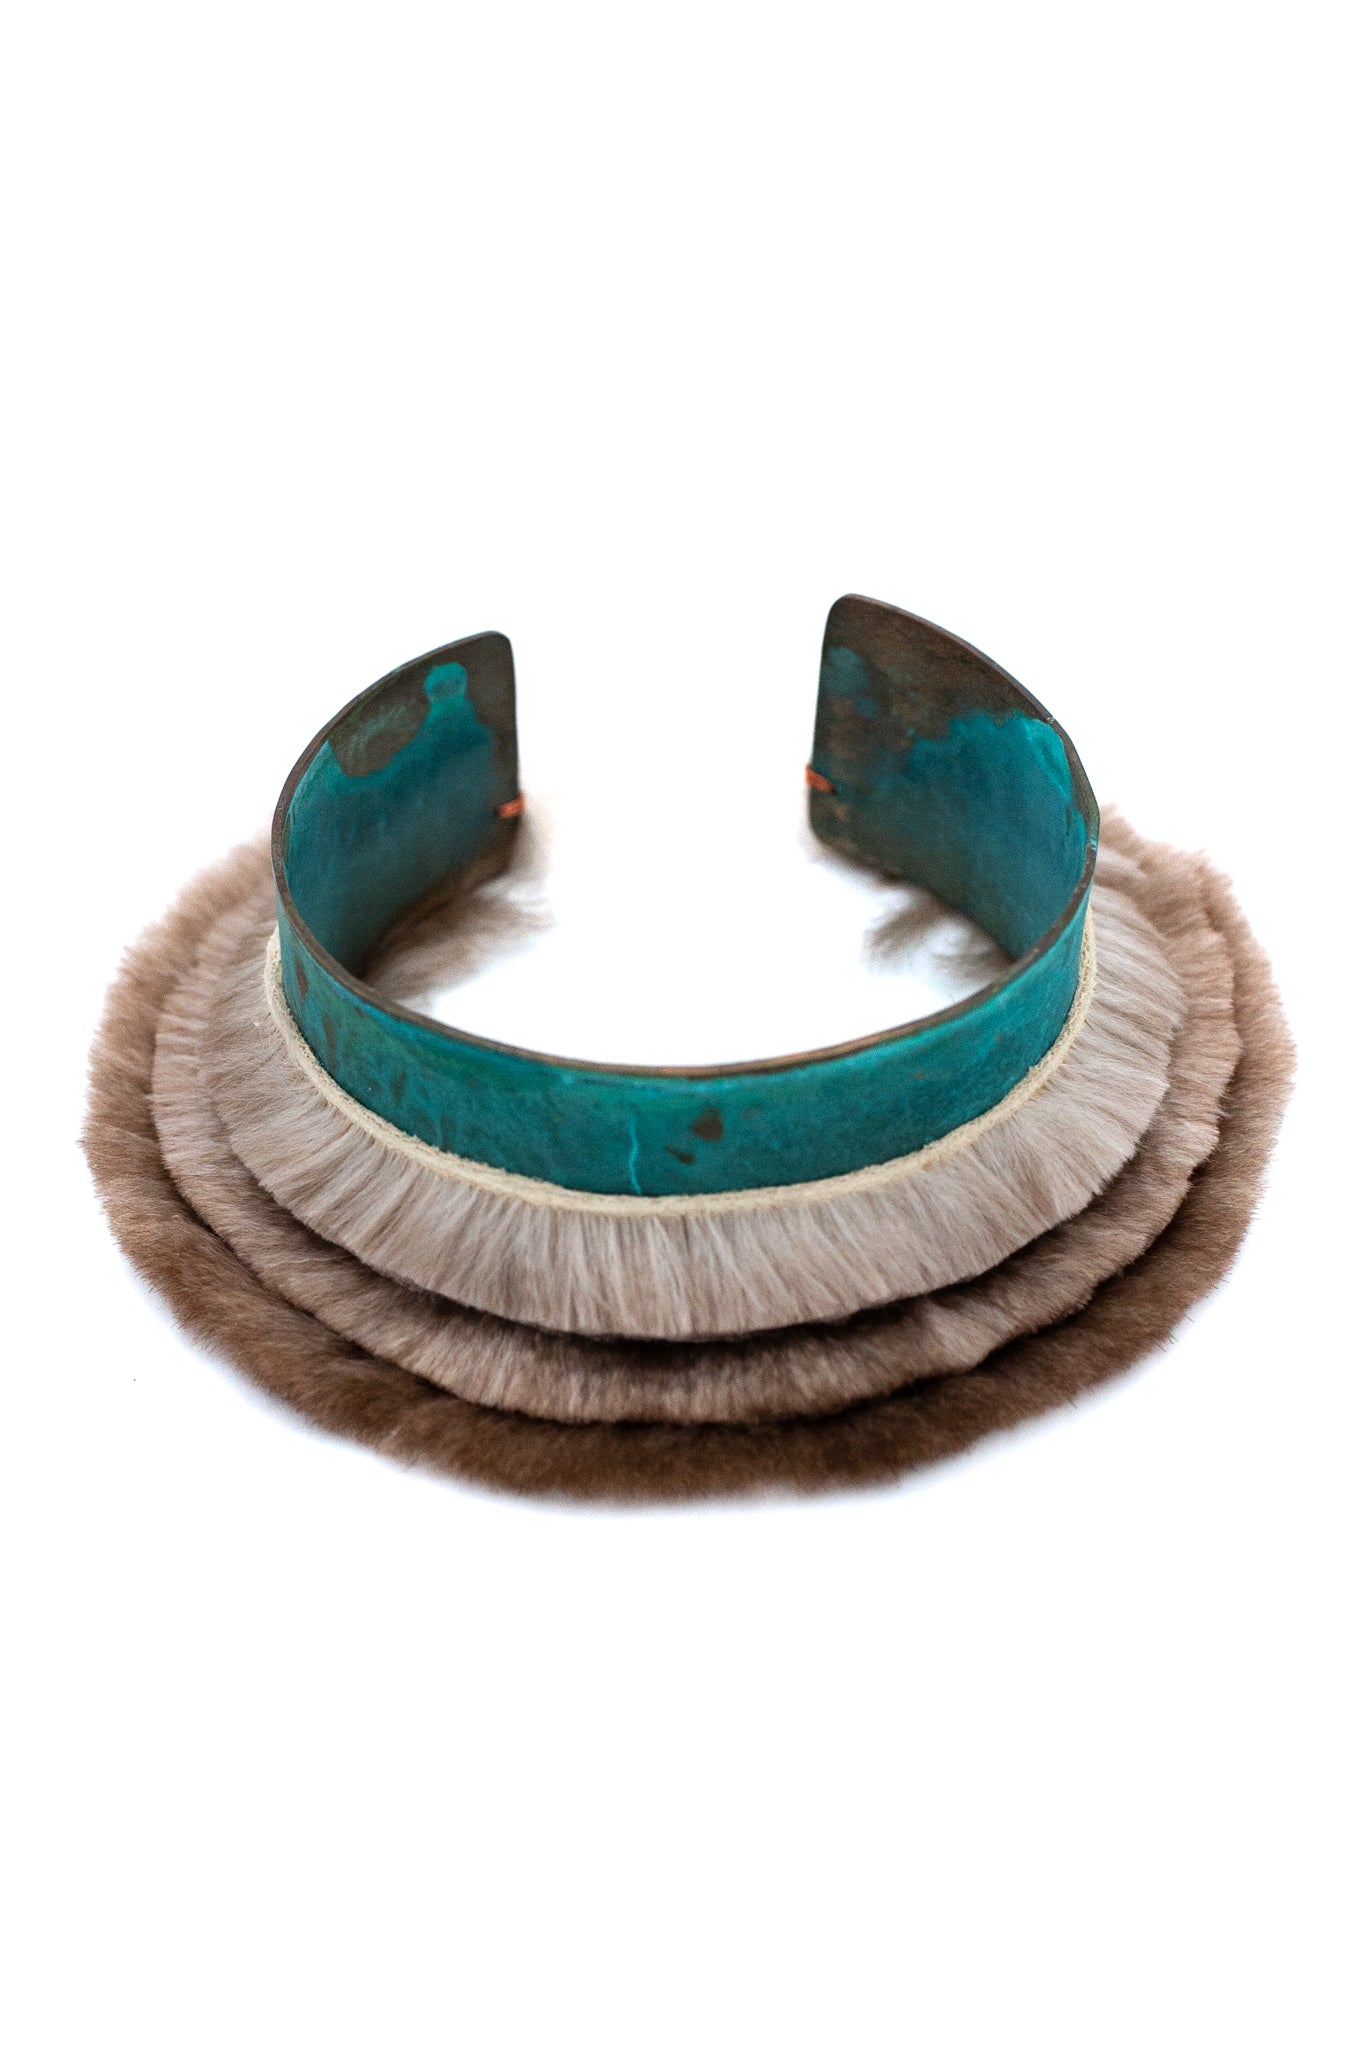 The tiered Bracelet with blue patina and sea otter fur